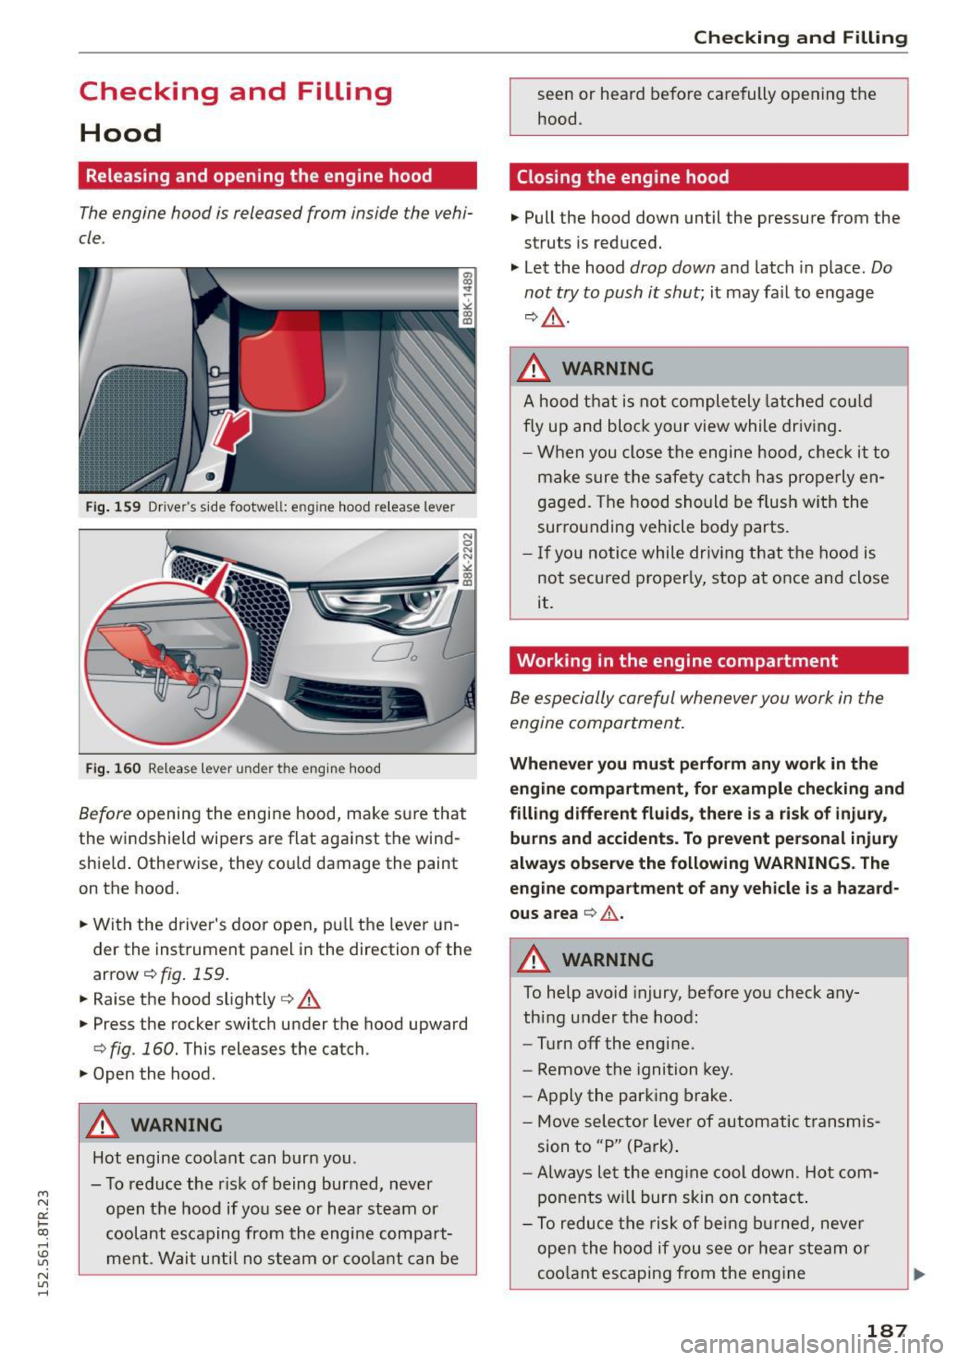 AUDI RS5 COUPE 2015  Owners Manual " N 
0:: l­oo 
rl I.O 
" N 
" rl 
Checking  and  Filling Hood 
Releasing  and  opening  the  engine  hood 
The  engine  hood  is released  from  inside  the  vehi­
cle. 
Fig. 159  Drivers  side 